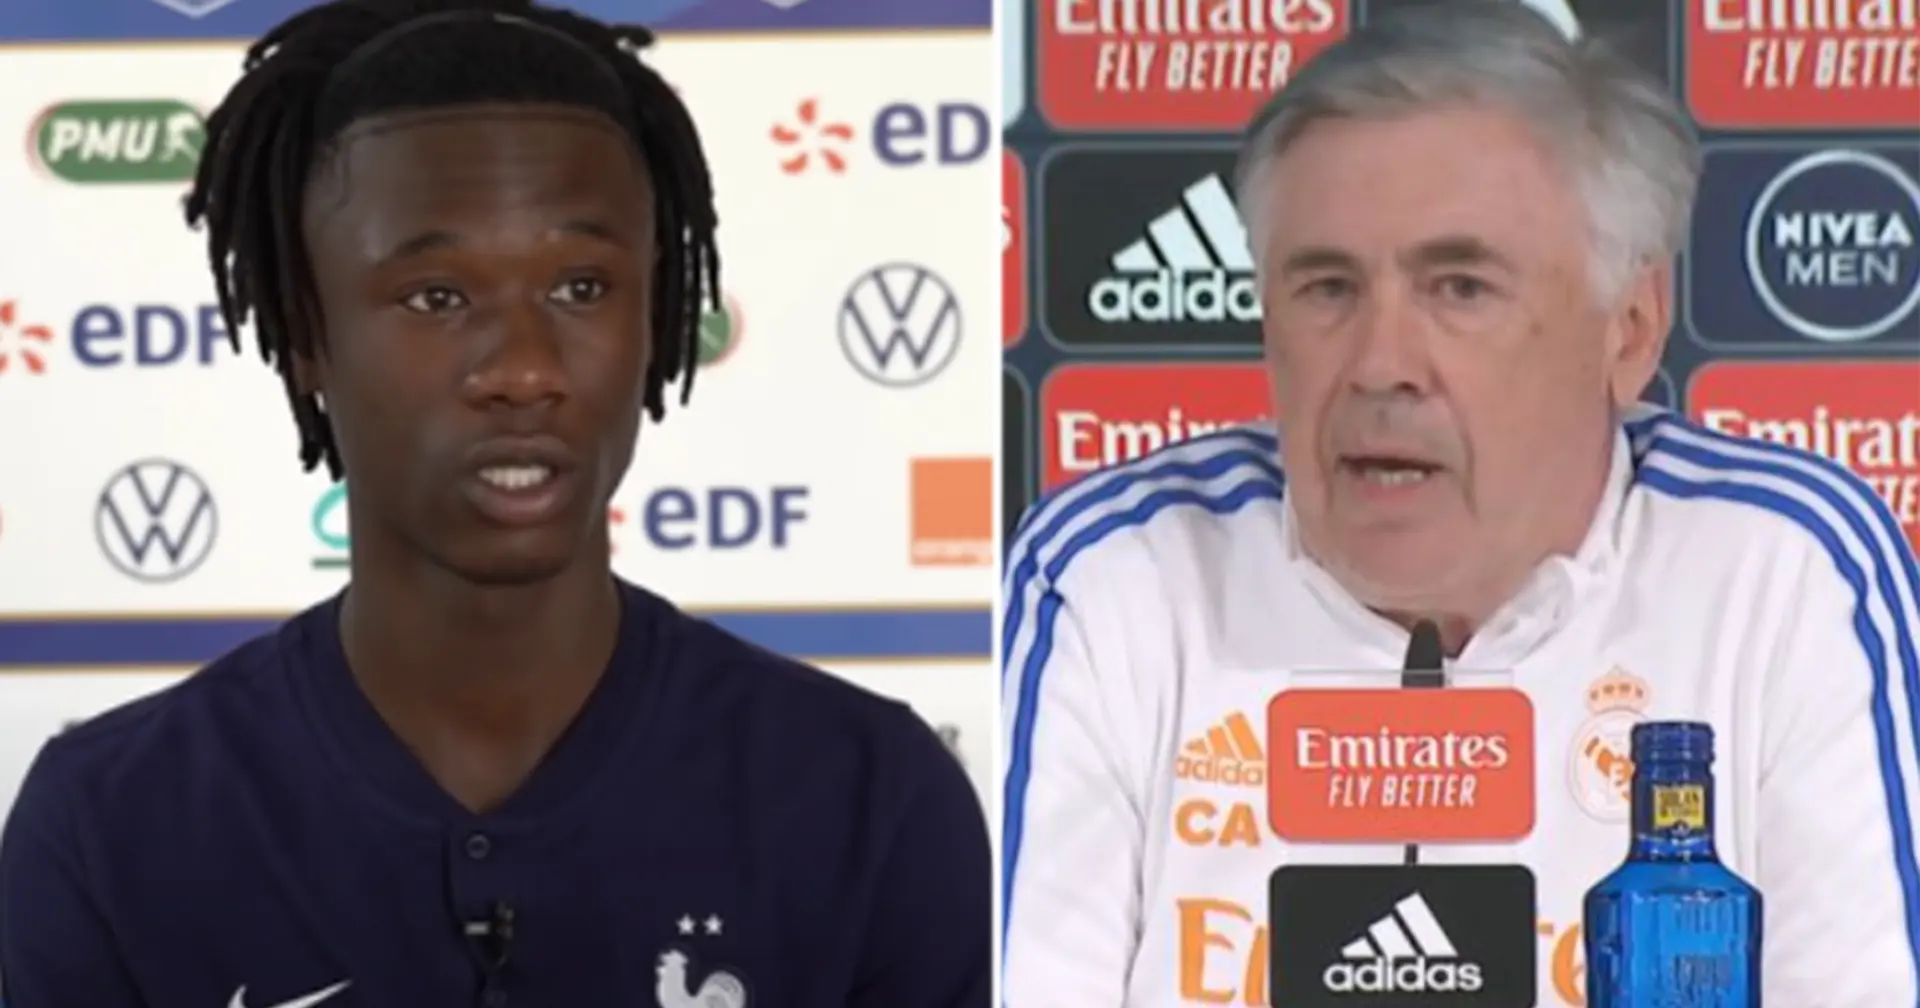 'In 10 years, Camavinga could be a starter': Ancelotti jokes about future Real Madrid midfield